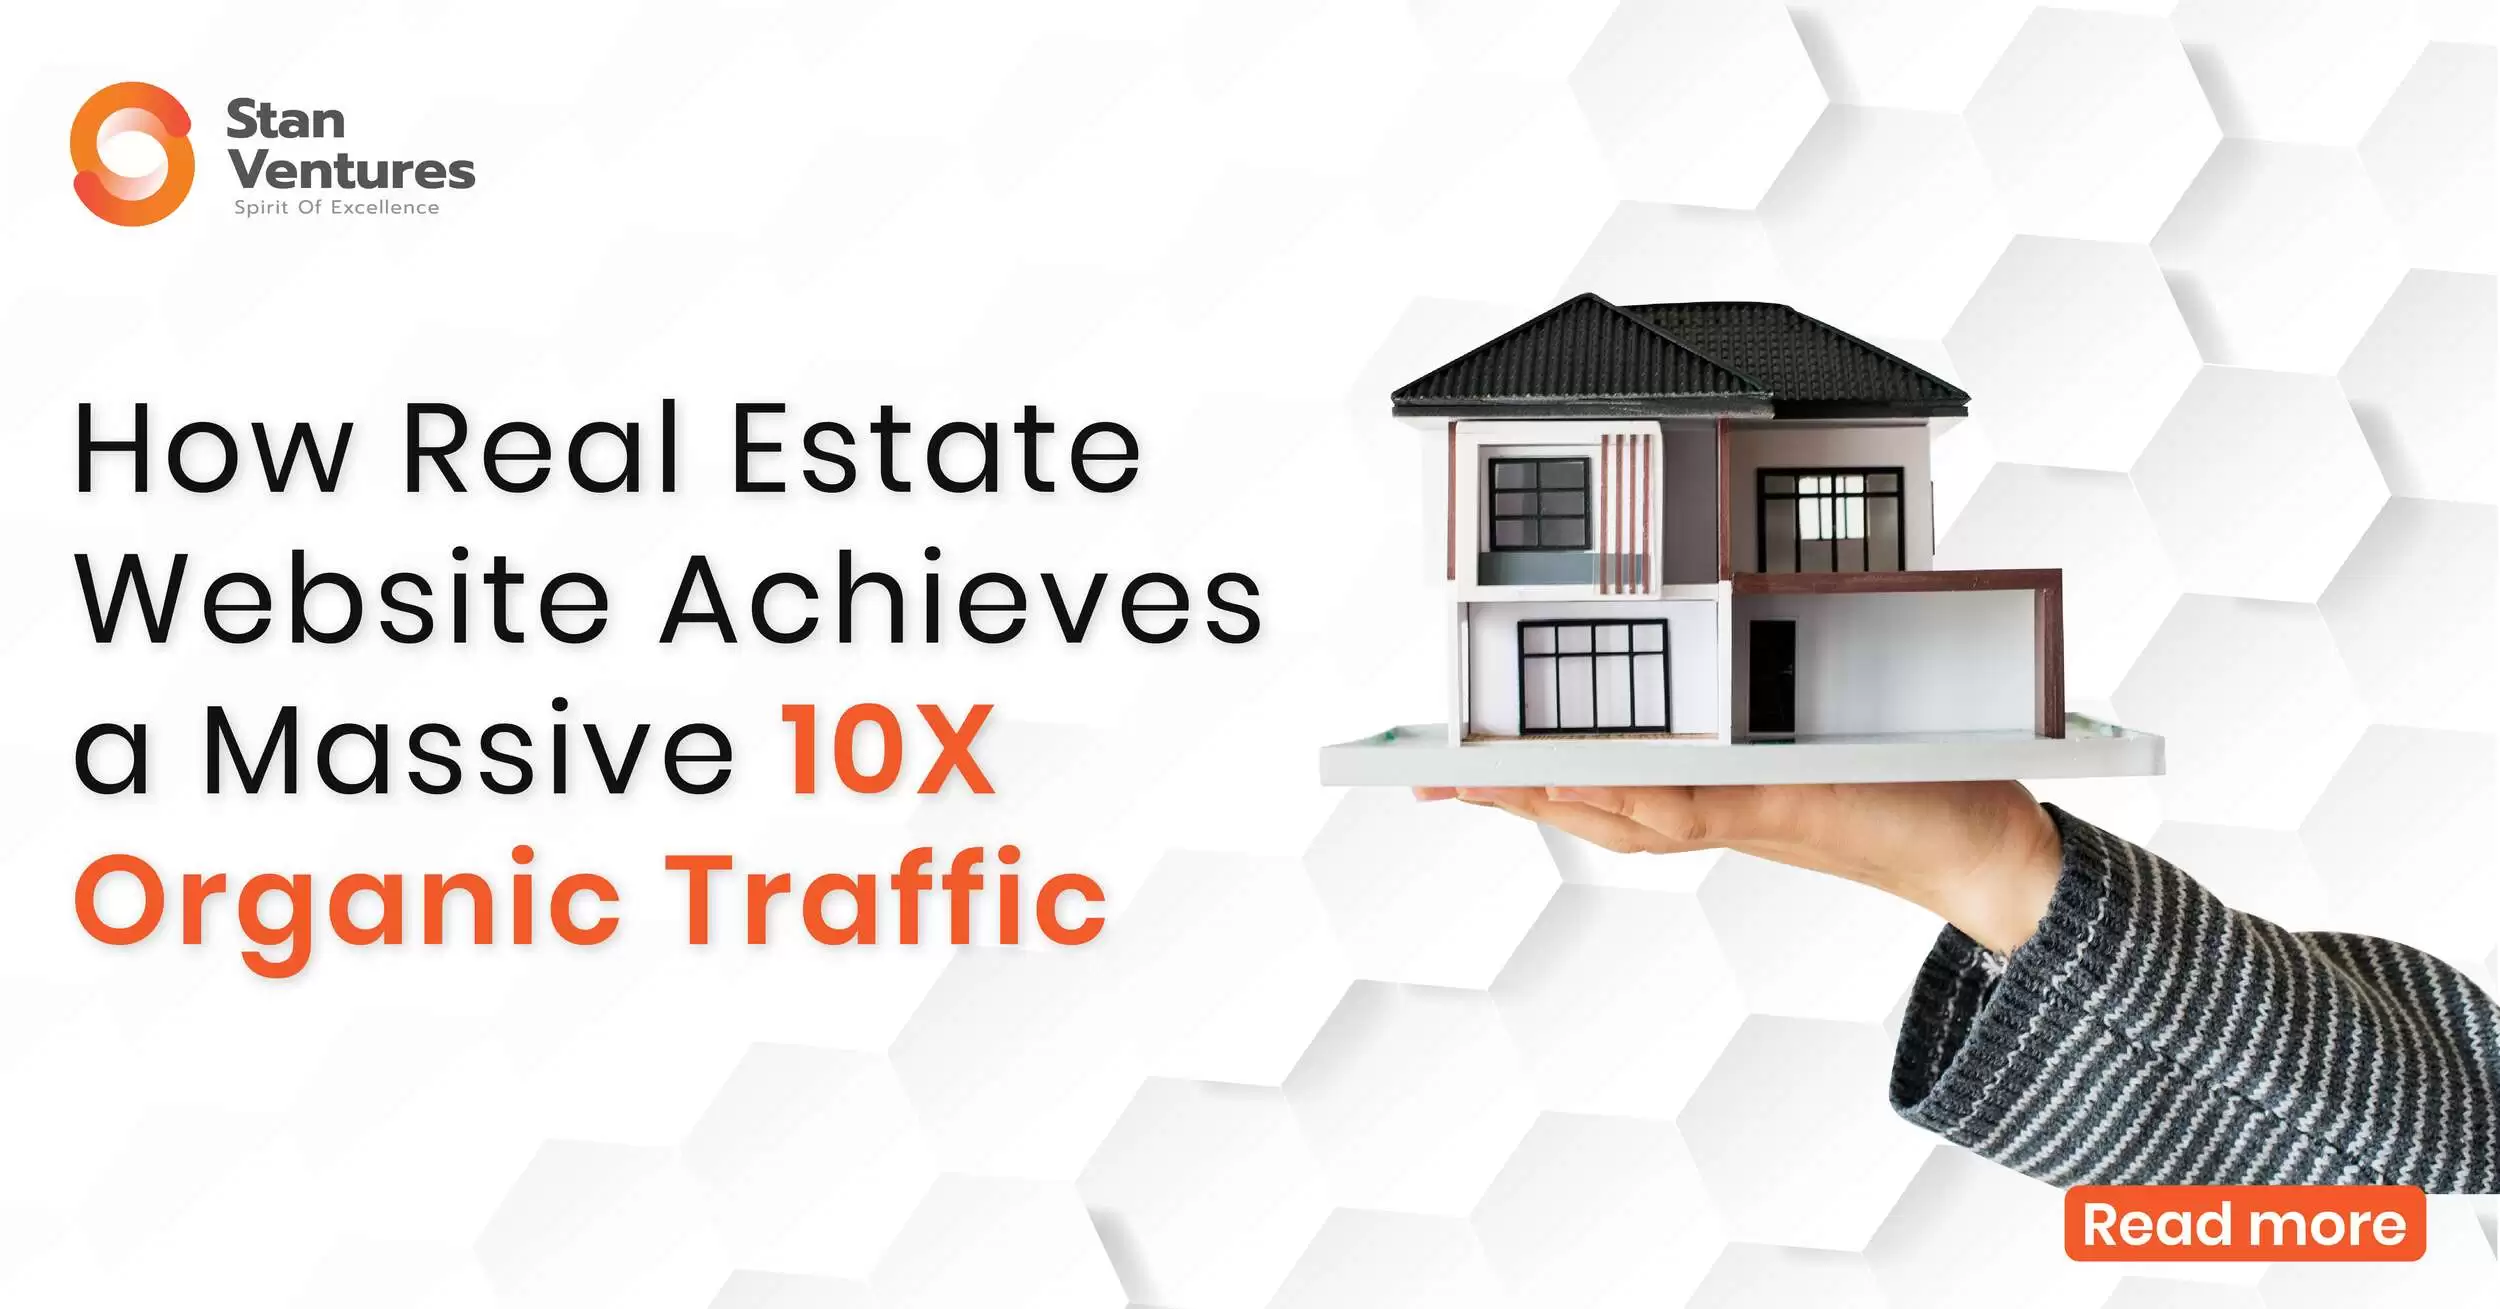 how real estate website achieves a massive 10x organic traffic - image